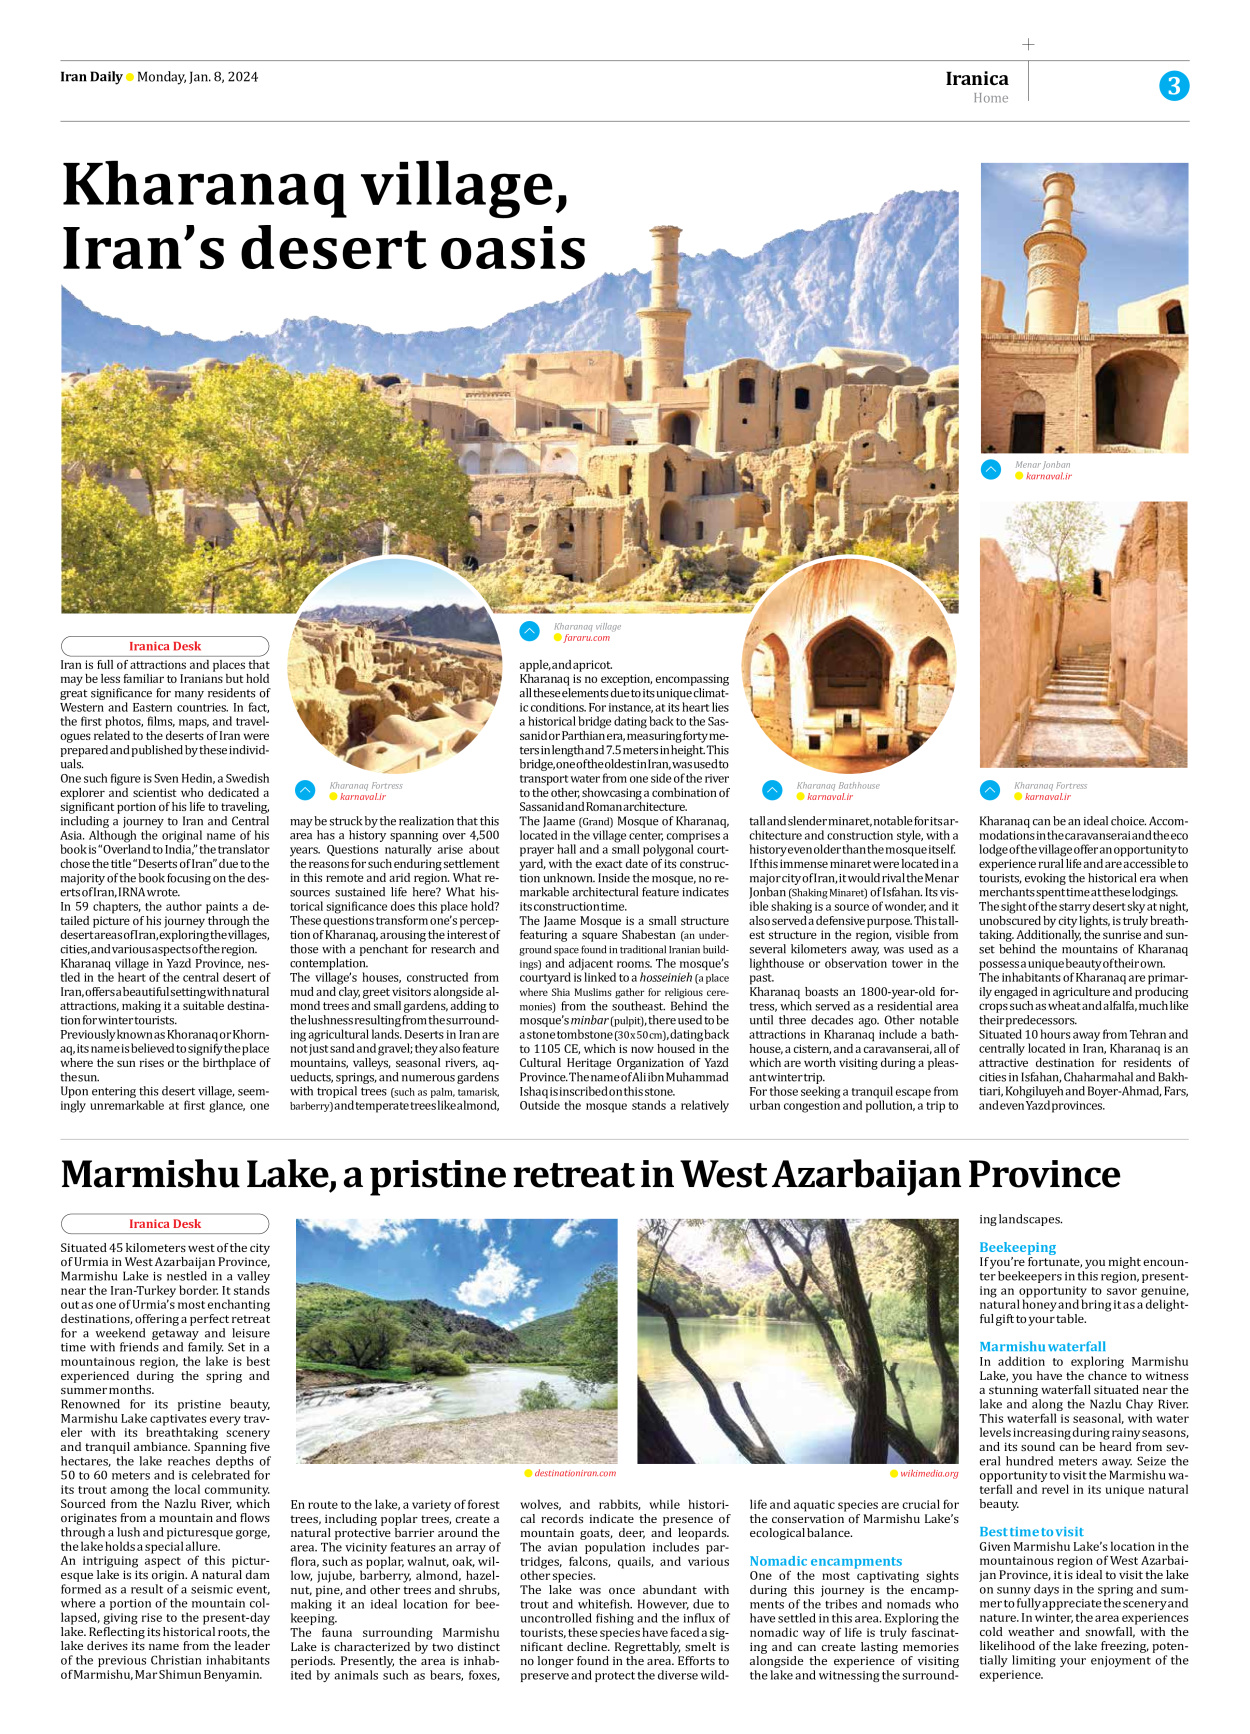 Iran Daily - Number Seven Thousand Four Hundred and Seventy Nine - 08 January 2024 - Page 3